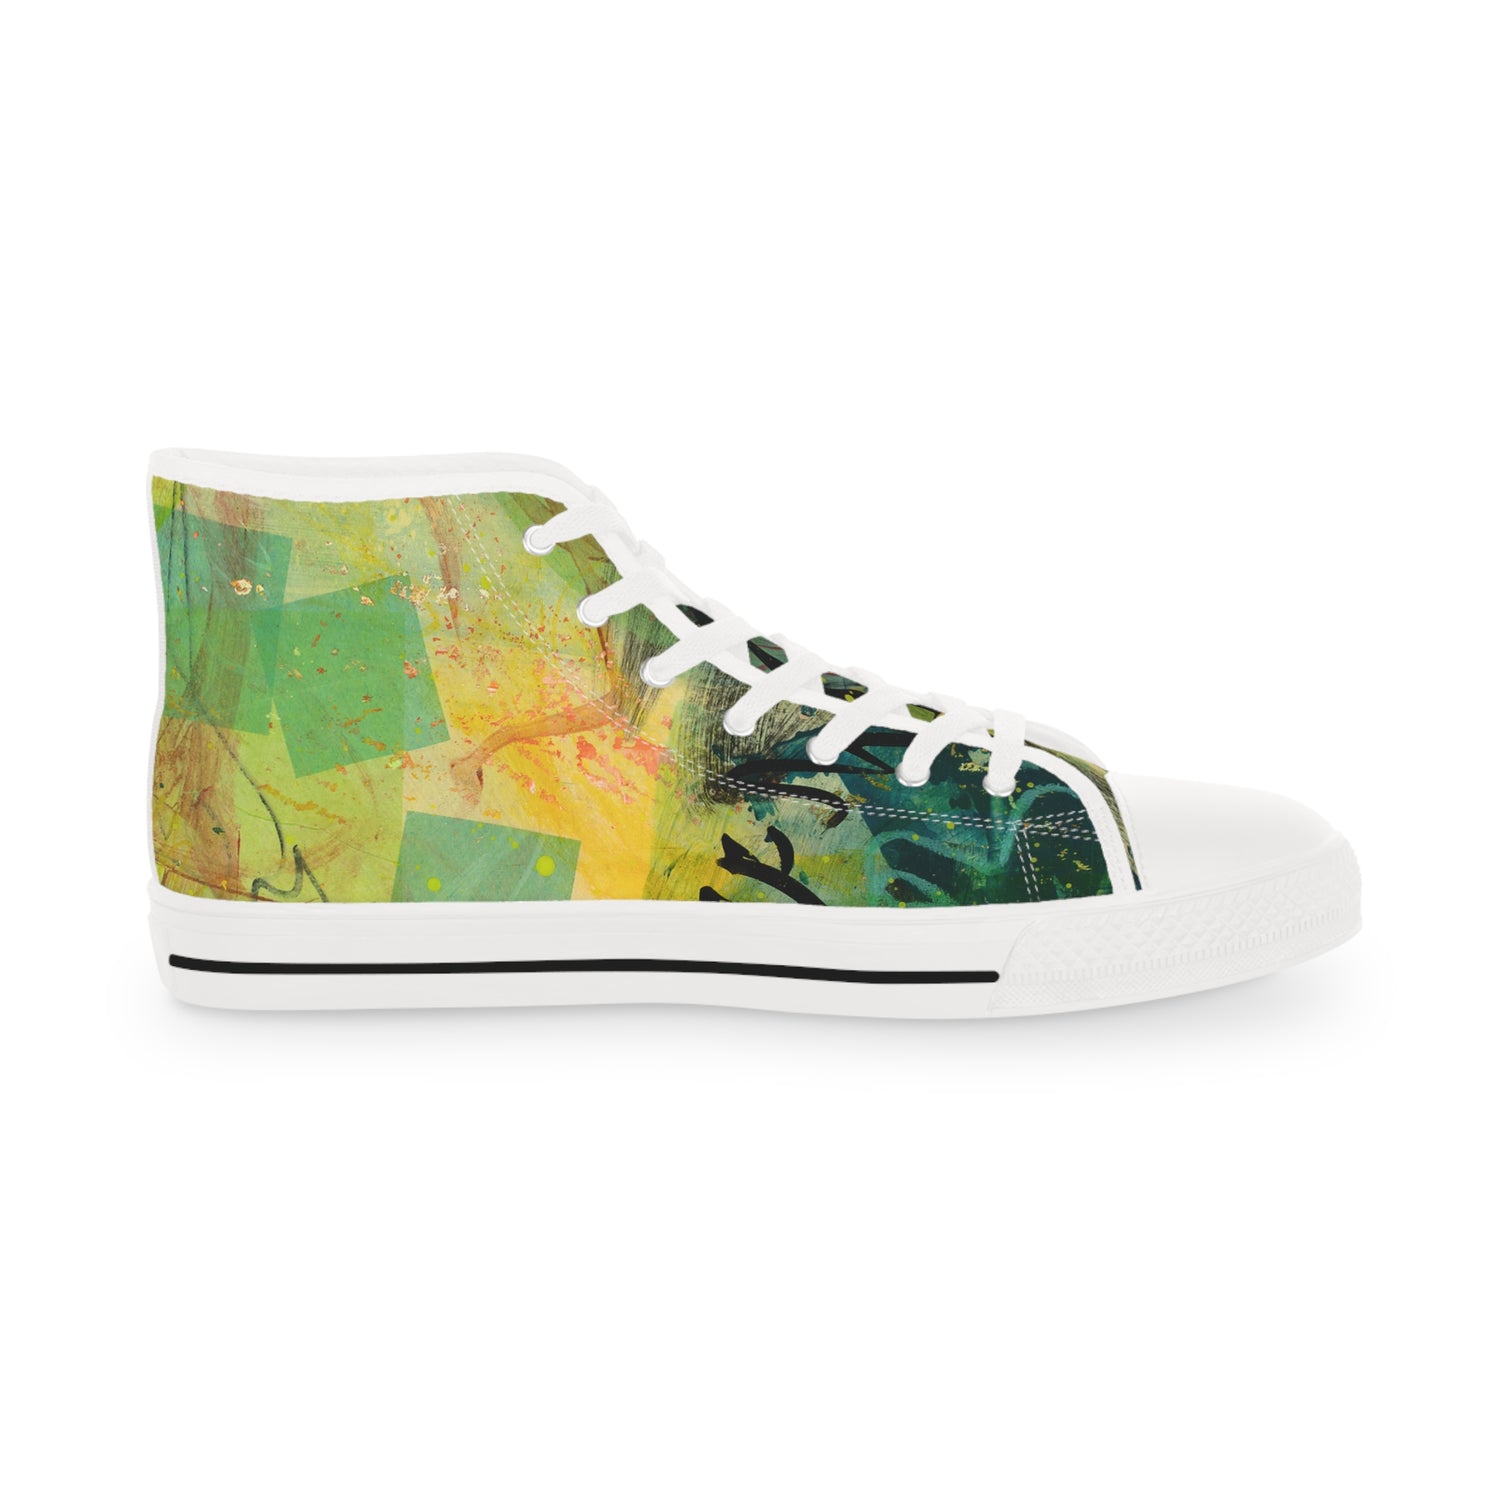 Women's High Top Patterned Canvas Sneakers